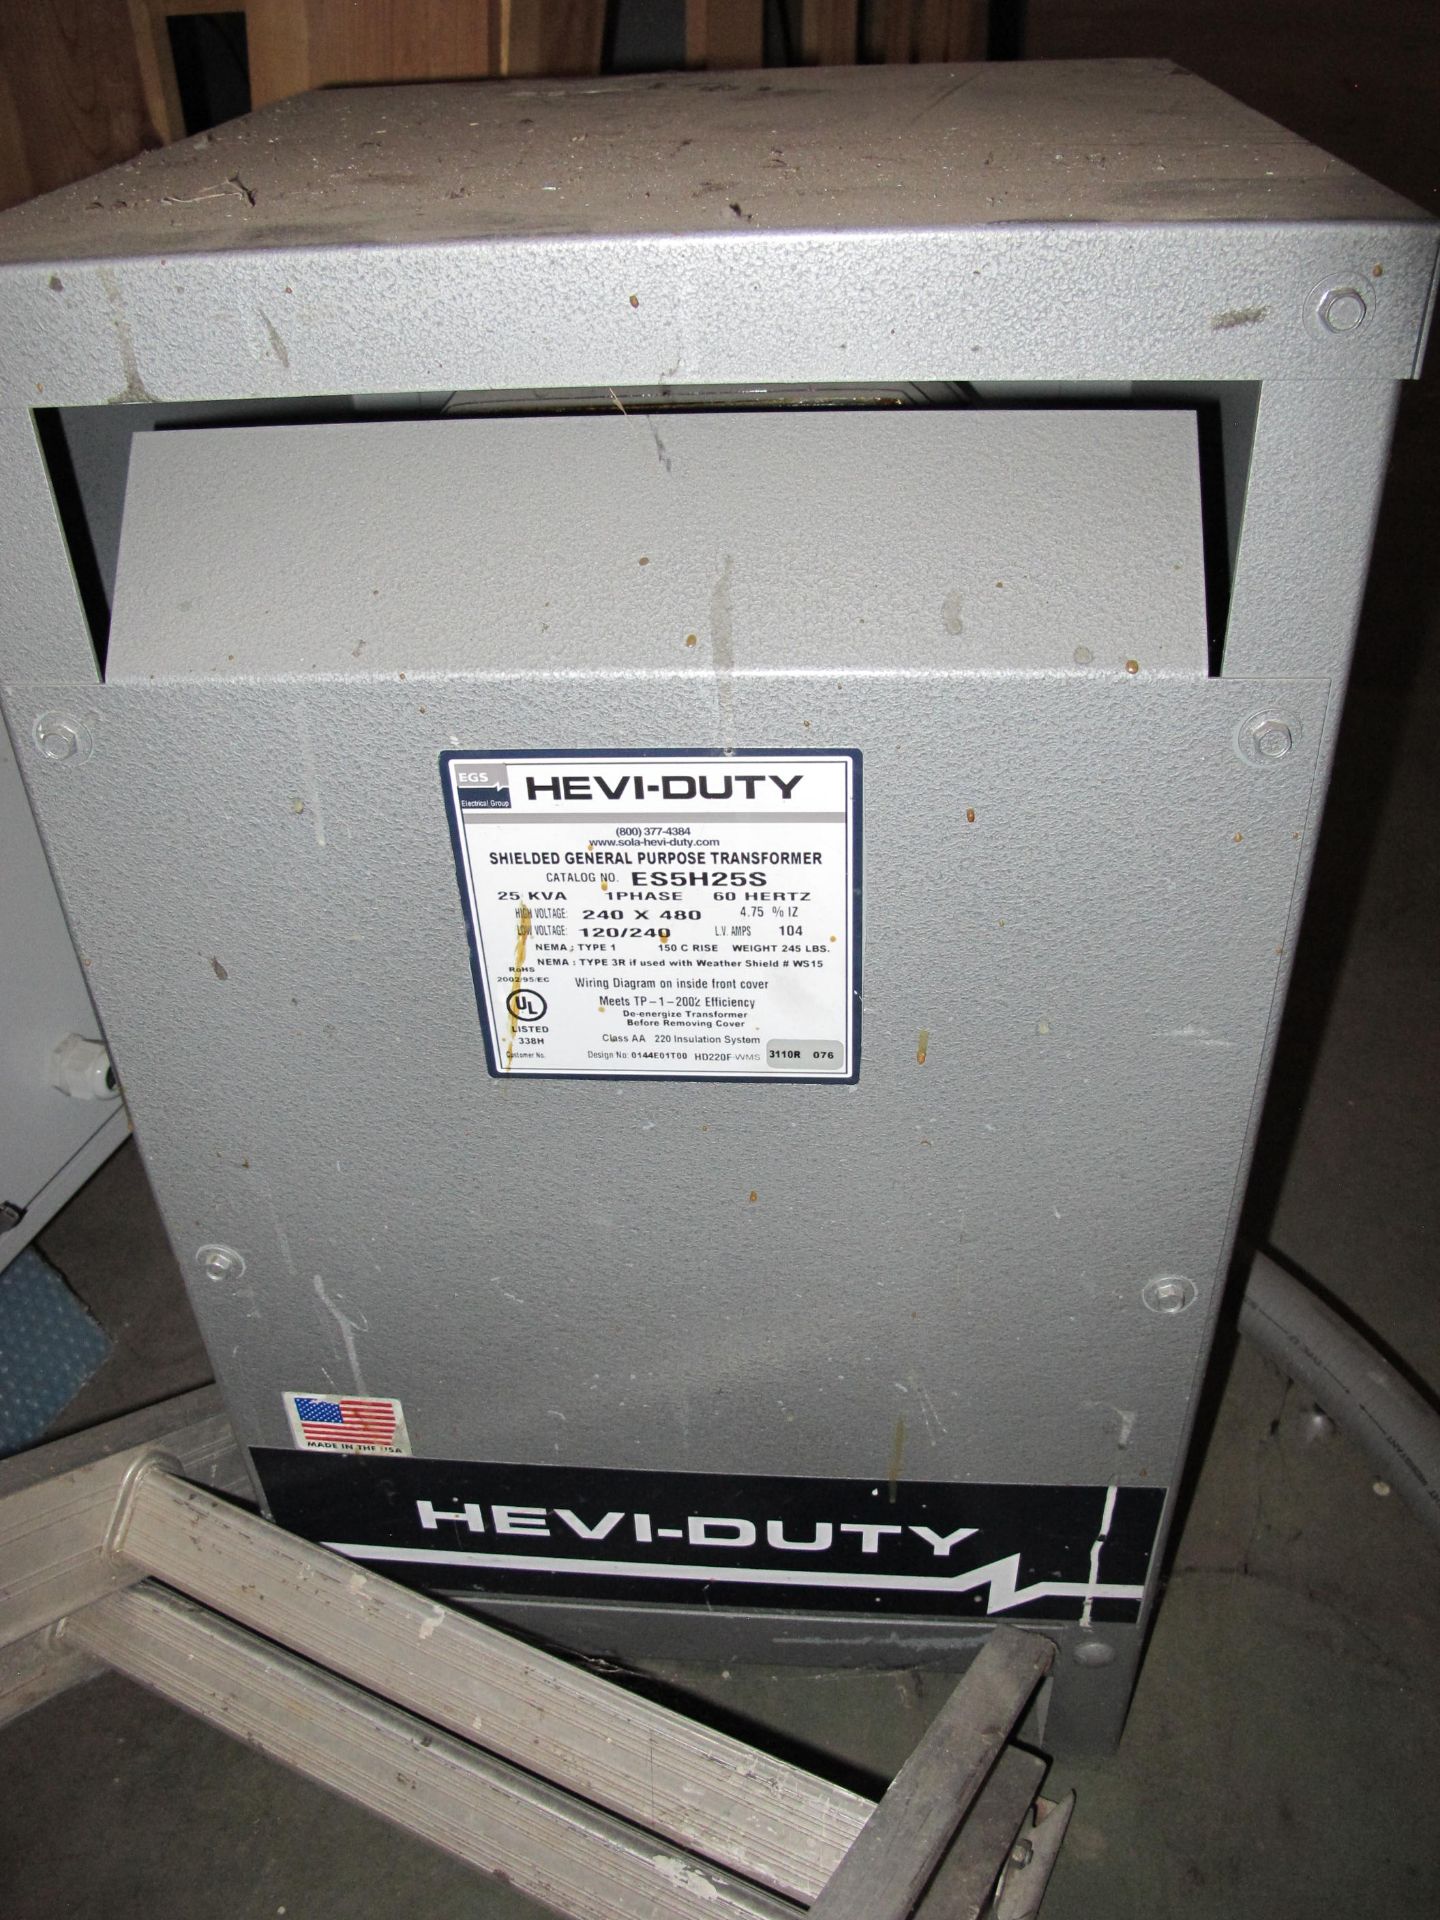 (1) CONTROL PANEL WITH ALLEN BRADLEY PANELVIEW 600, (1) HEVI-DUTY GENERAL PURPOSE TRANSFORMER, - Image 2 of 4